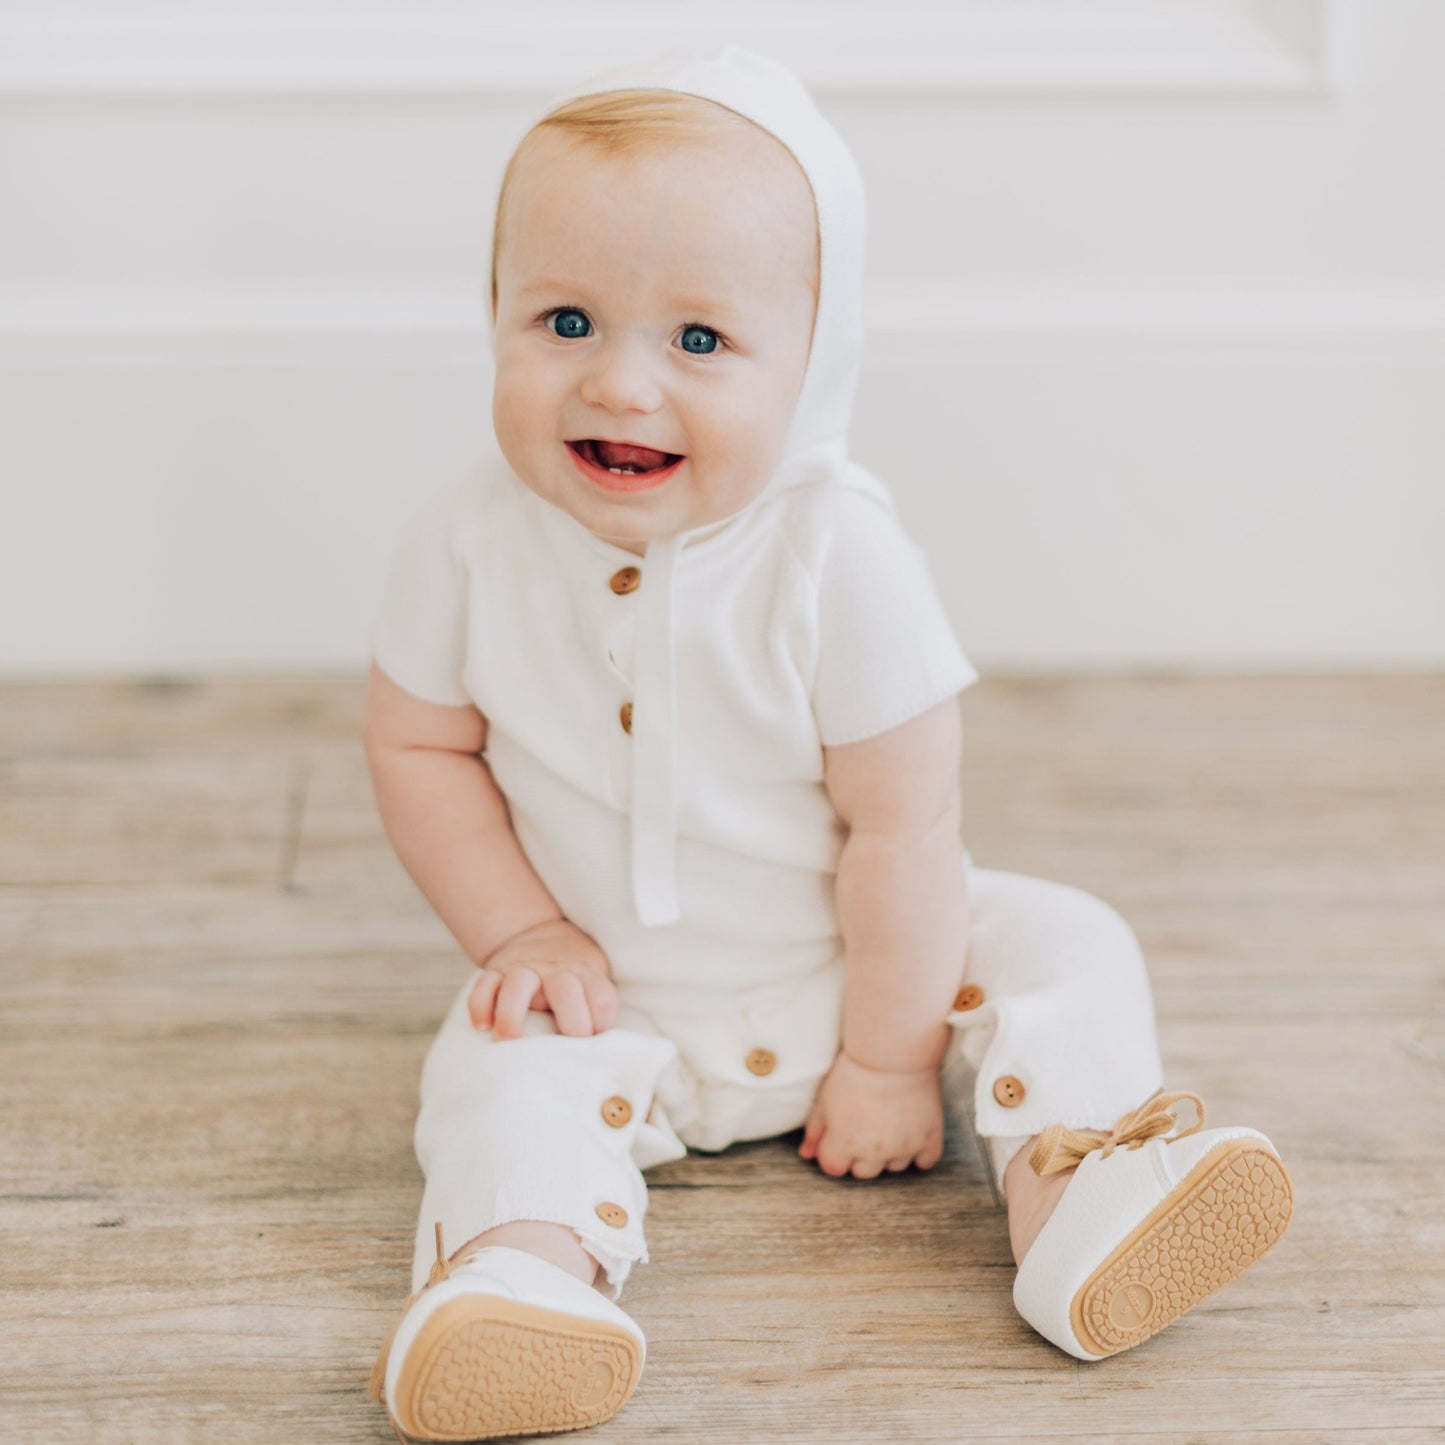 Baby boy sitting up on the ground smiling in a white blessing outfit.